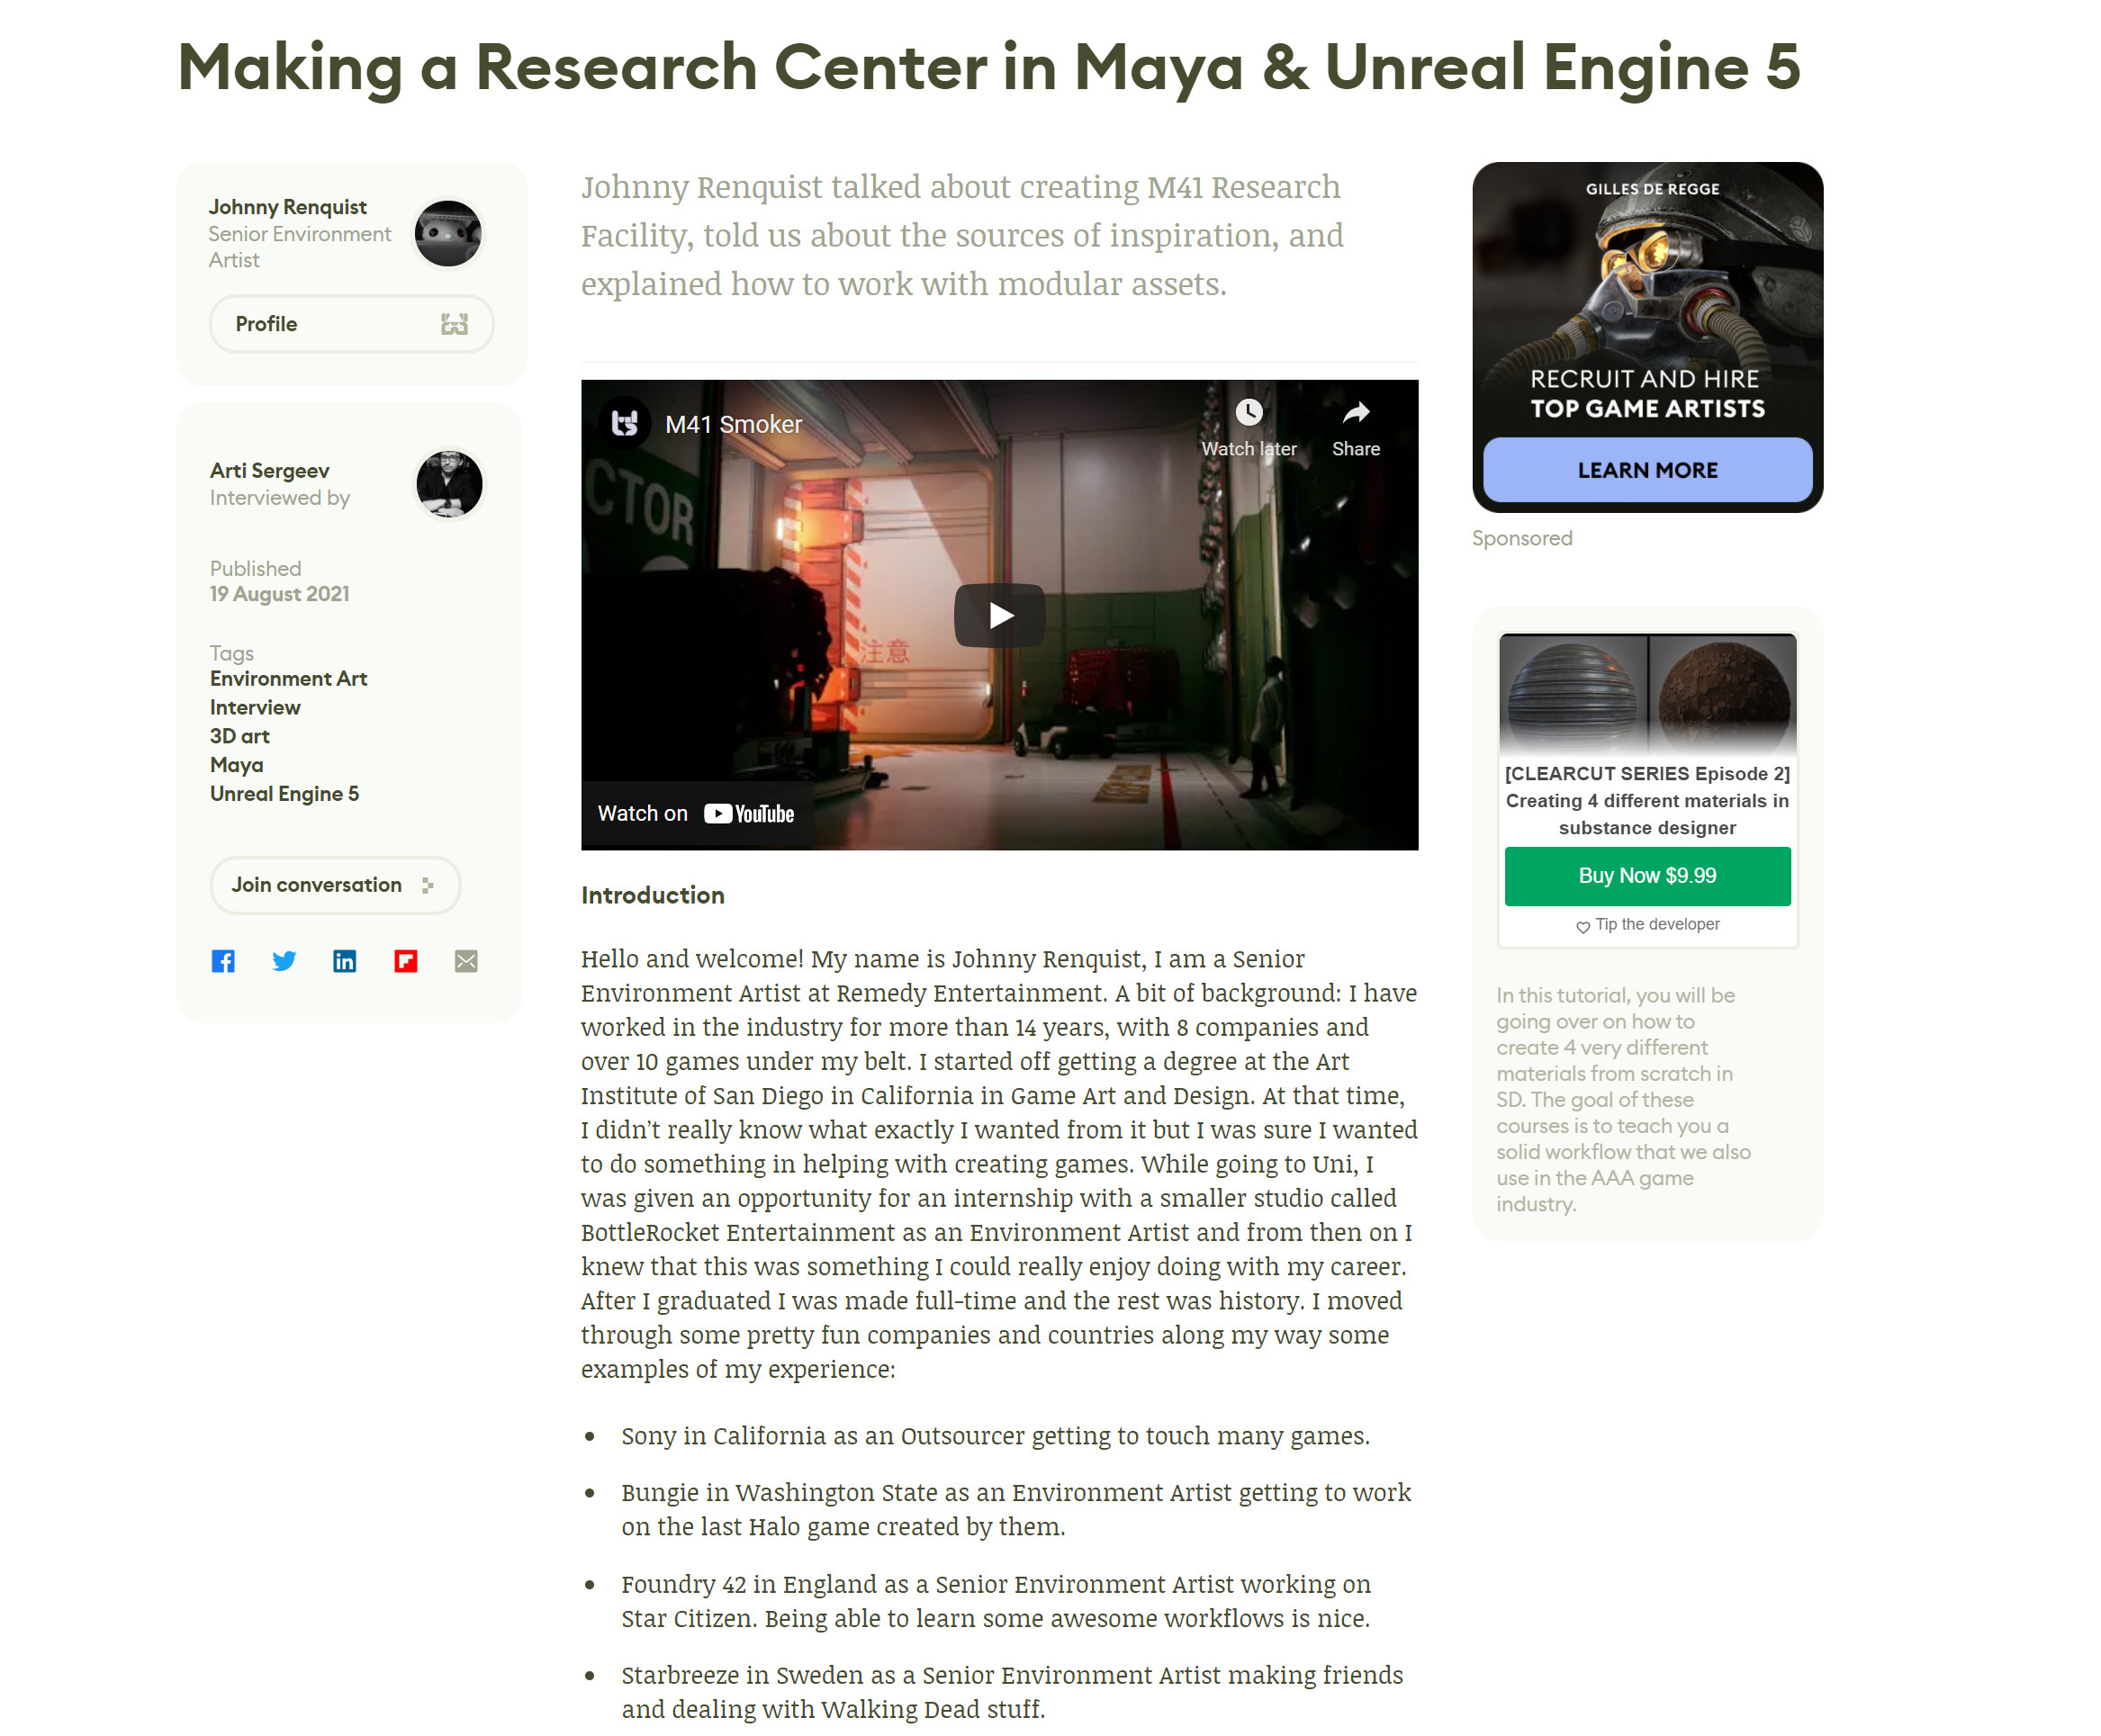 The full article can be found here. 
https://80.lv/articles/making-a-research-center-in-maya-unreal-engine-5